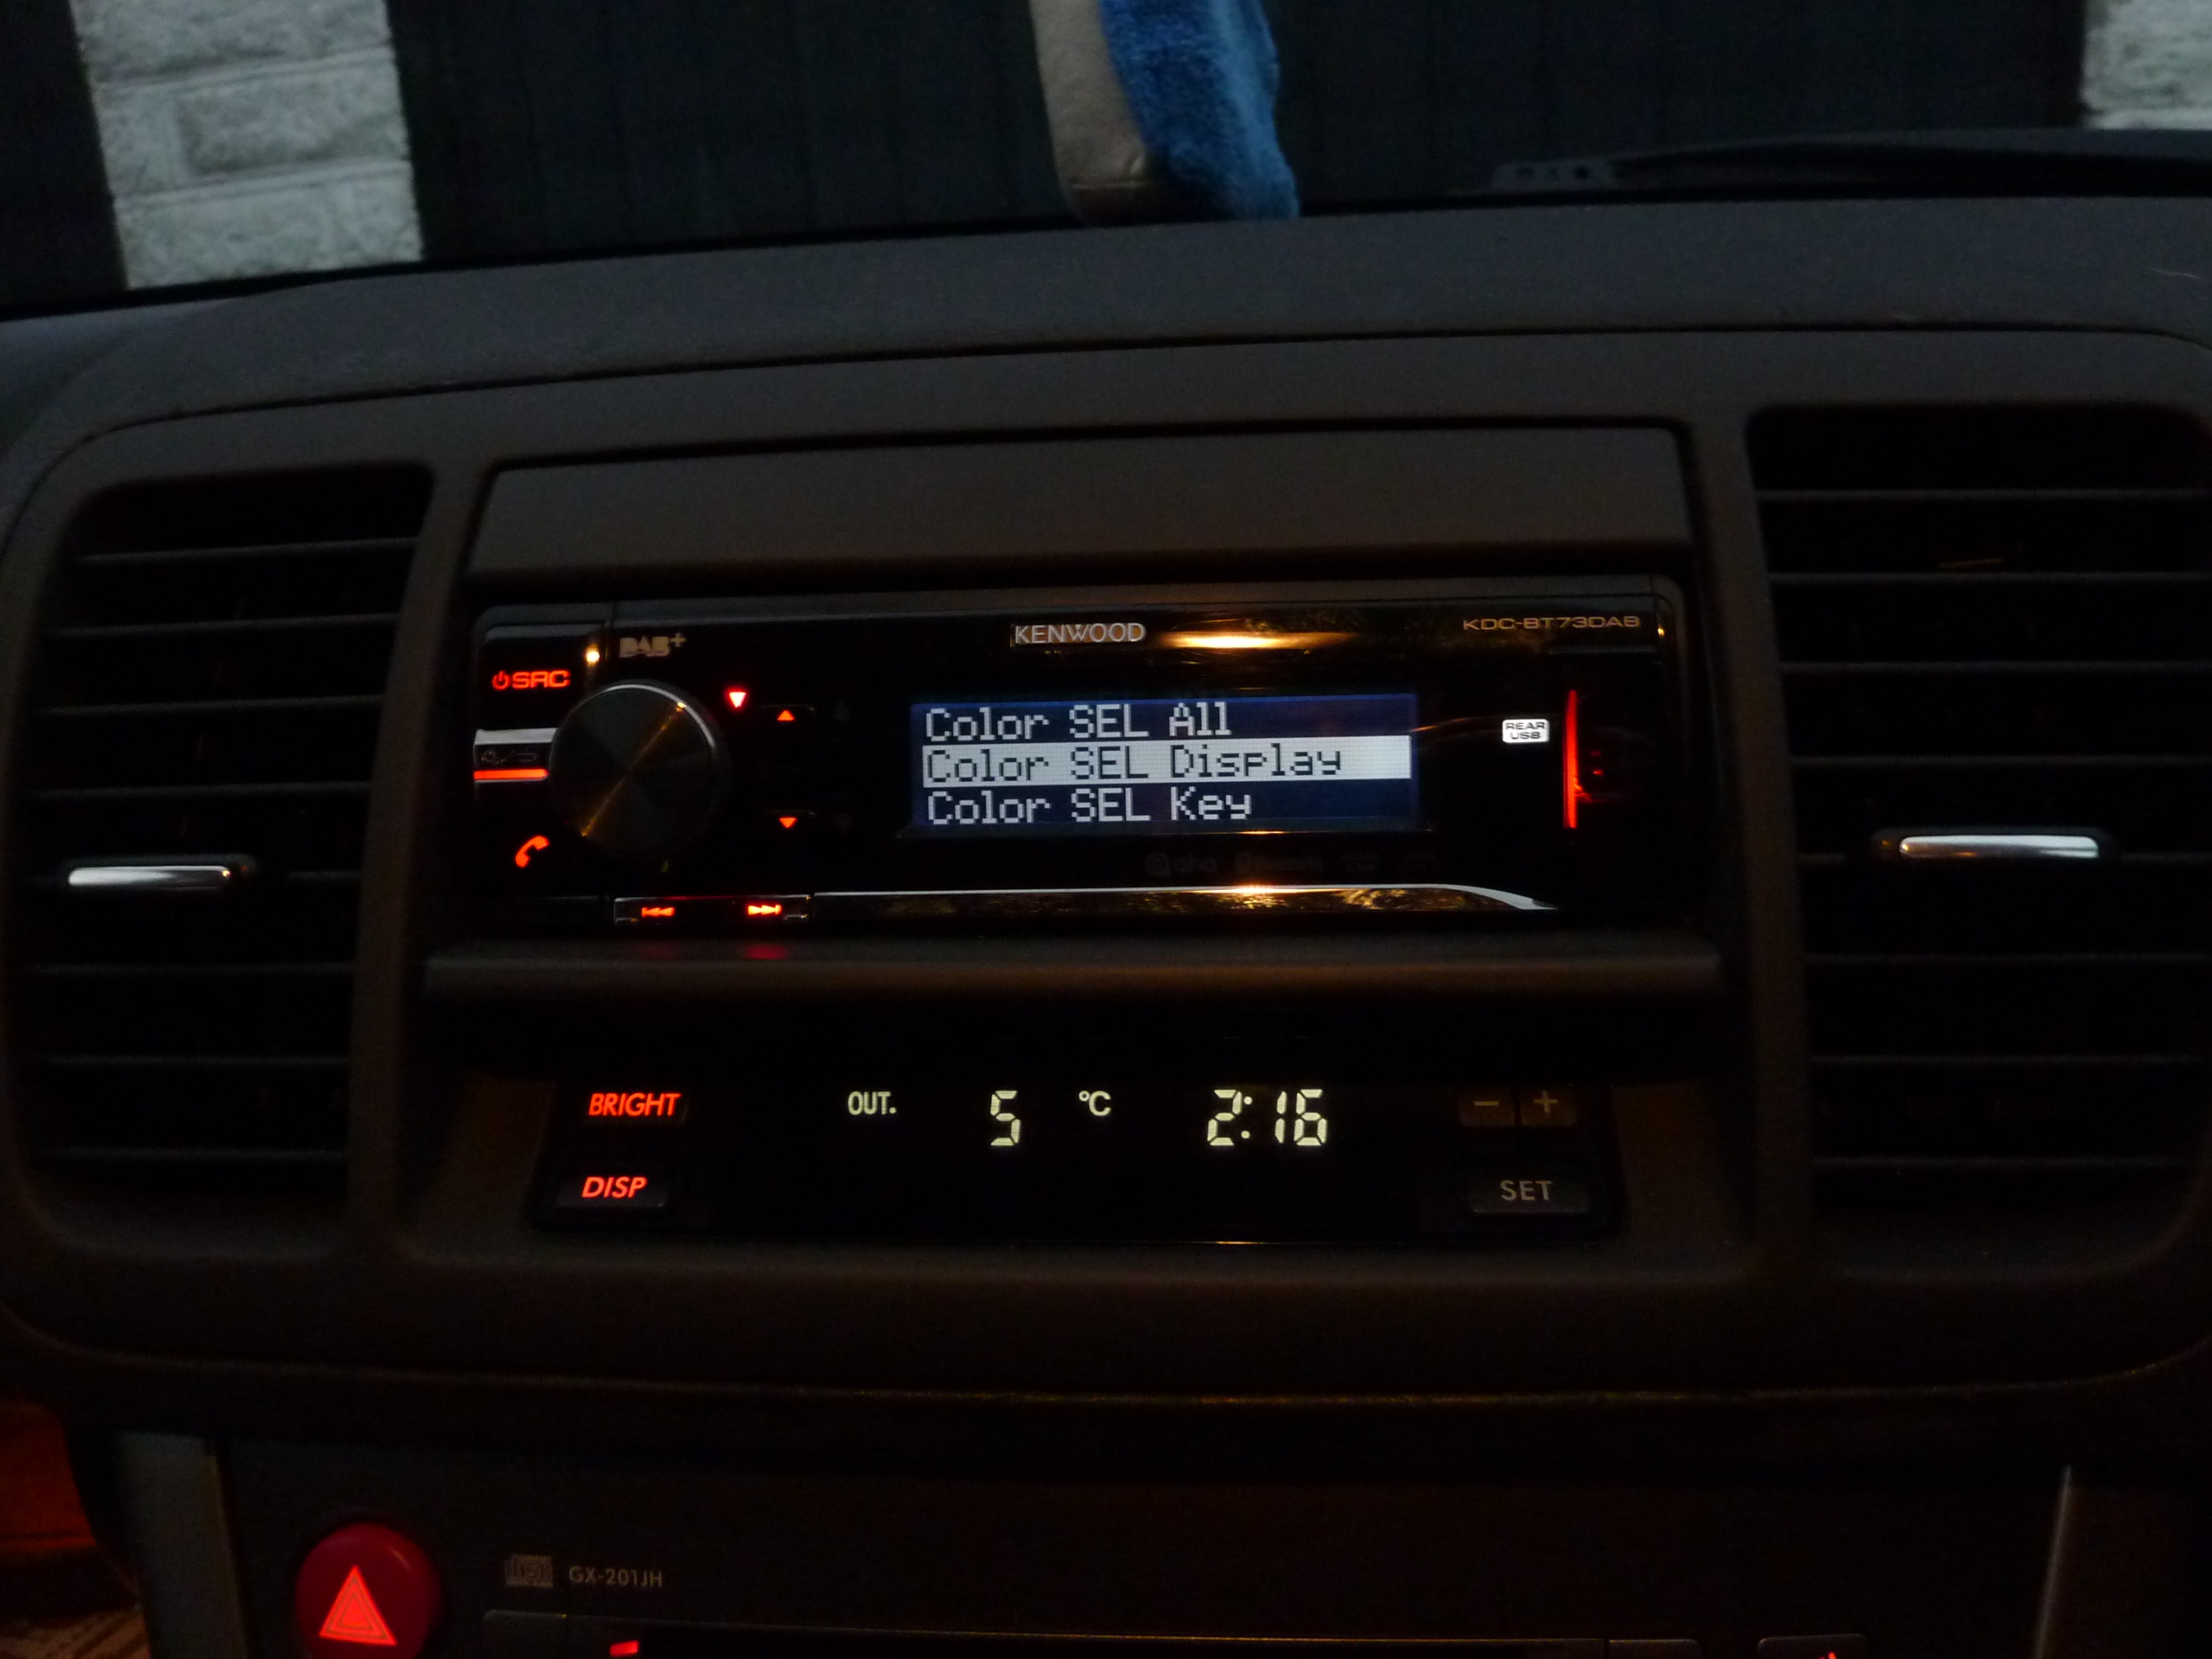 Period style DAB/Bluetooth Stereo for 2003 TT - Page 1 - In-Car Electronics - PistonHeads